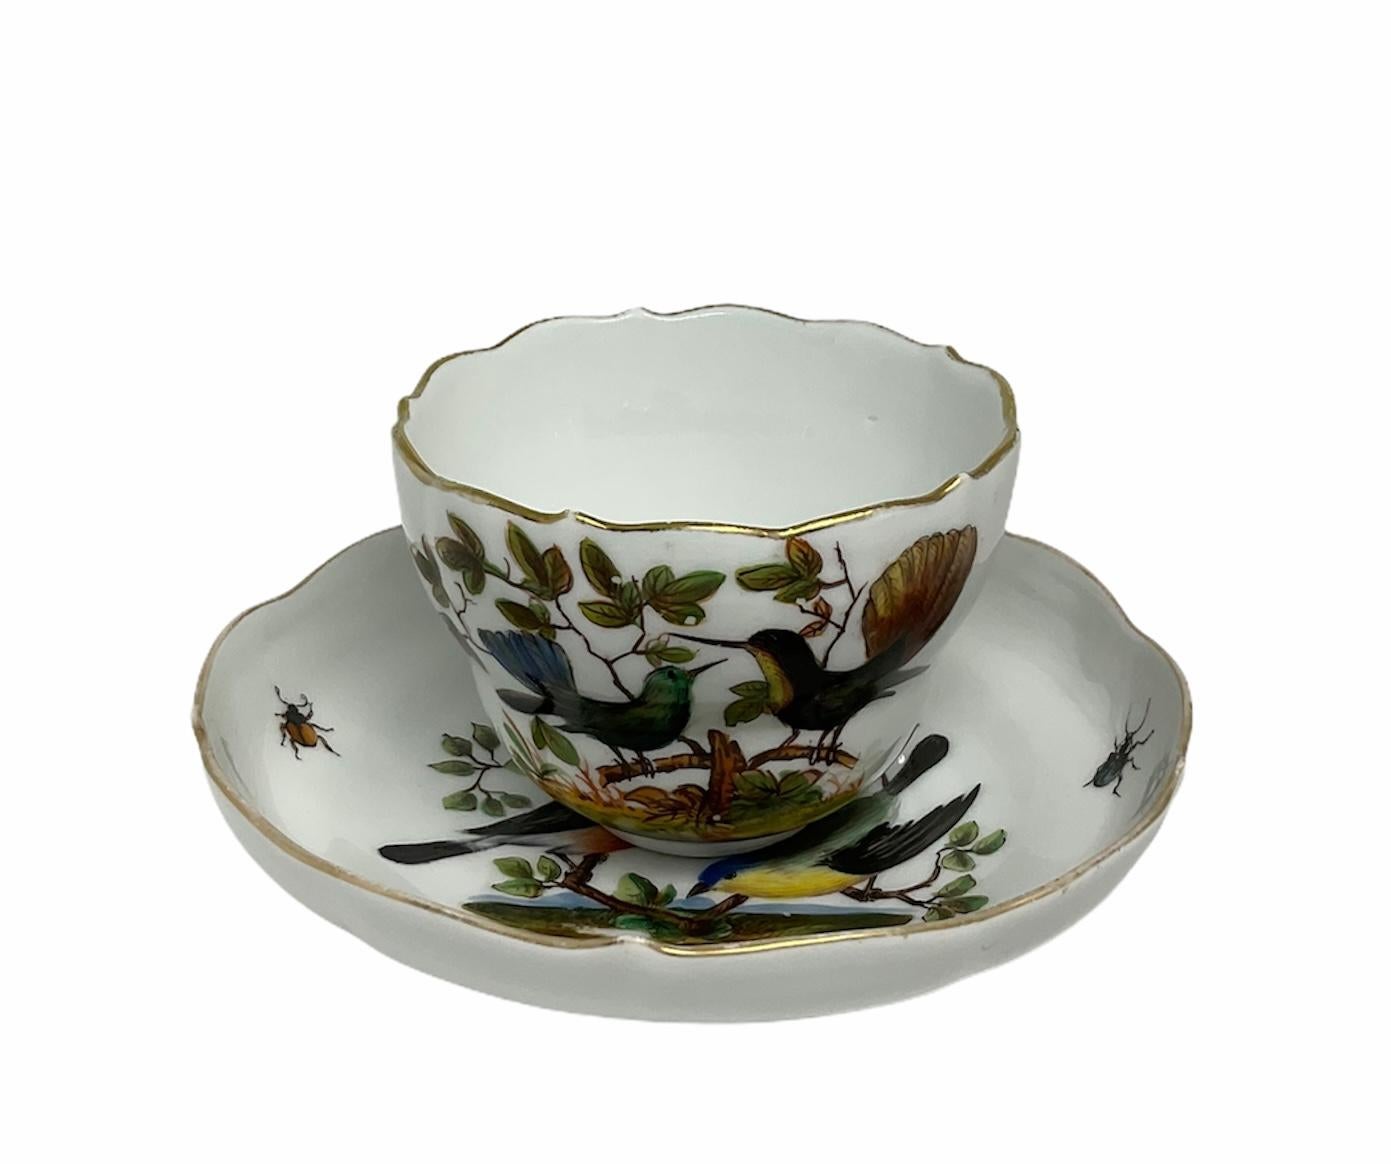 This is a hand painted Meissen porcelain cup and saucer. It is featuring the Rothschild pattern birds with some insects and butterflies. The cup as well as the saucer have a gilt serpentine rim. The handle is adorned with some acanthus leaves. Below